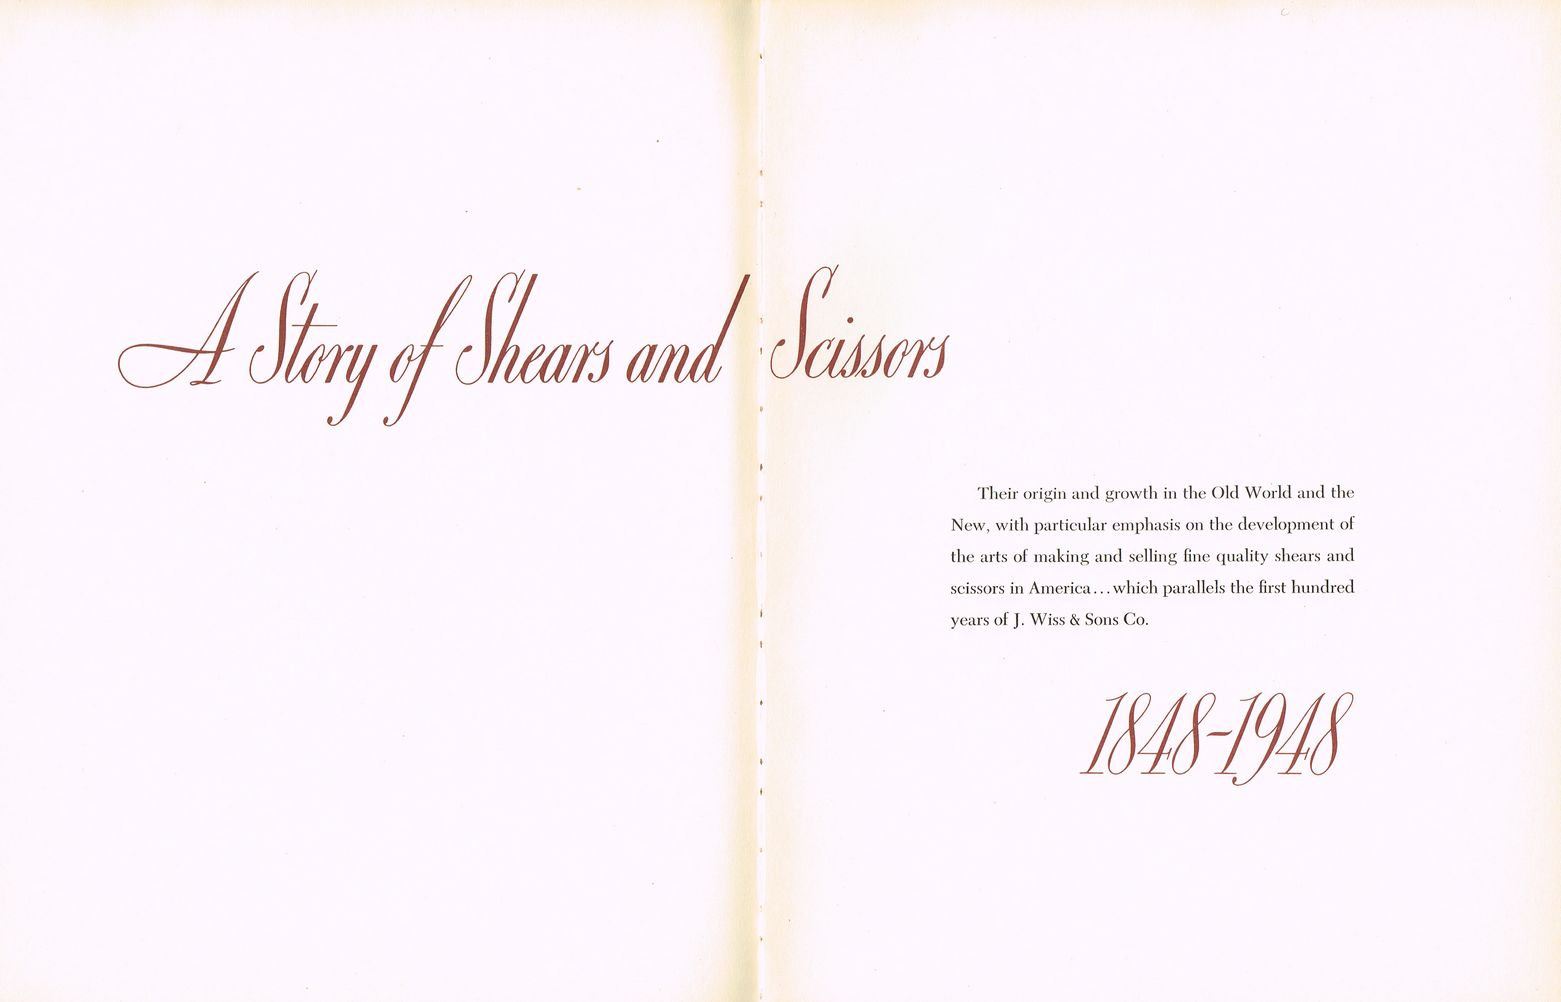 A Story of Shears and Scissors: 1848-1948: Page 2